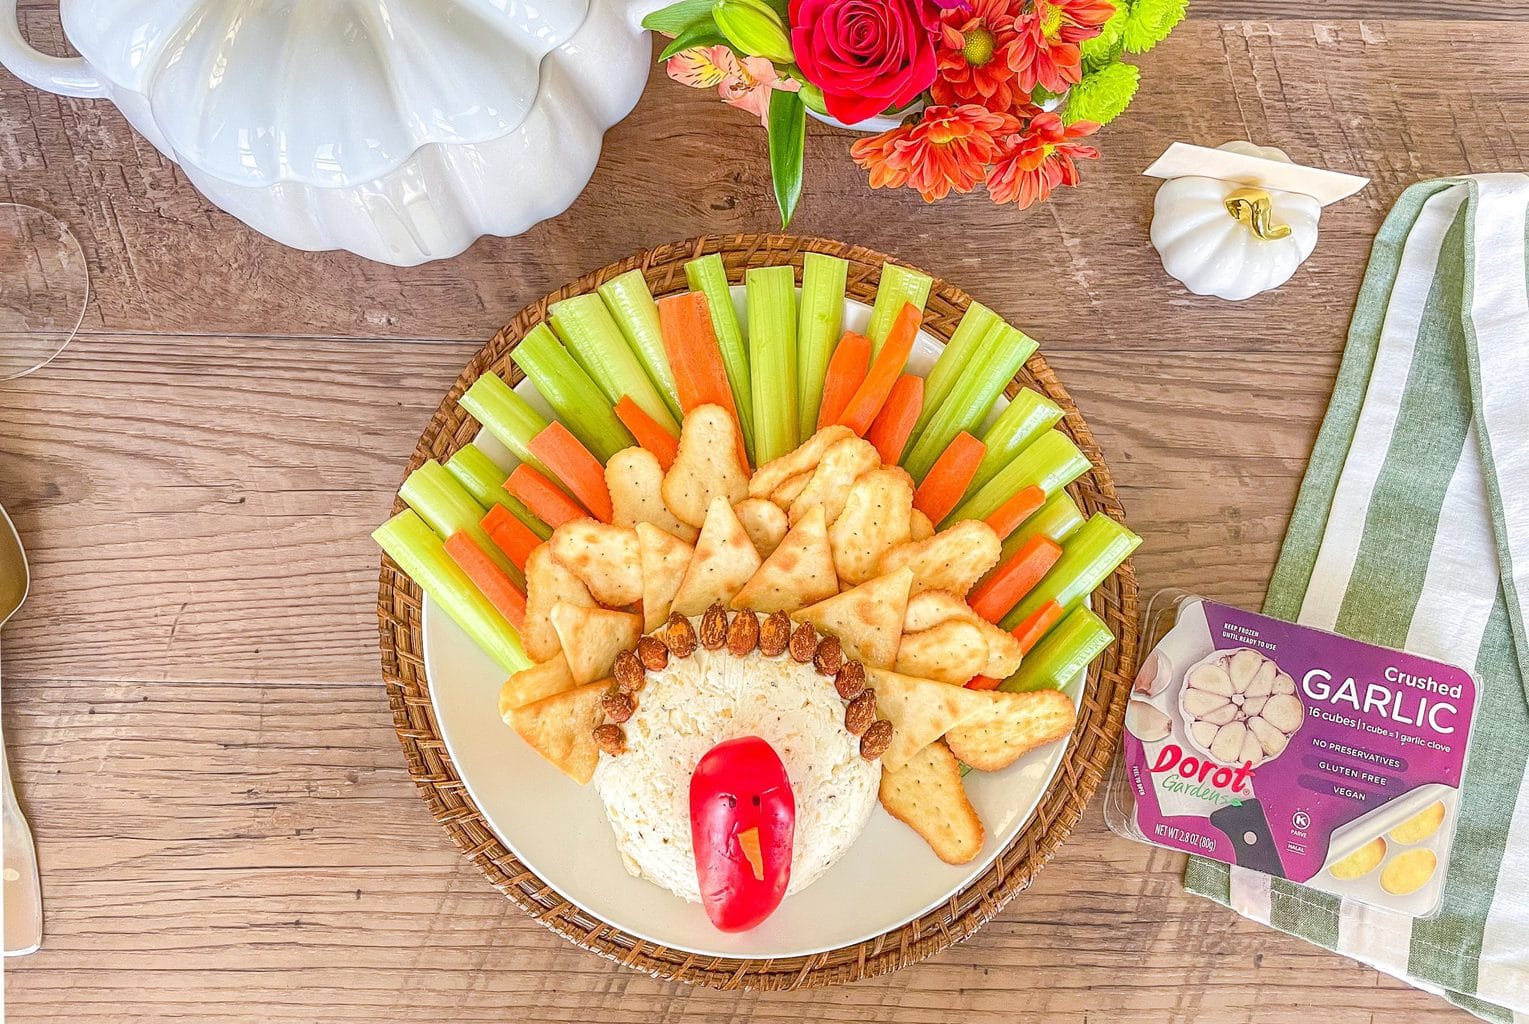 Cheese ball made to resemble a turkey with a red pepper face, and carrots, celery and crackers for the feathers.